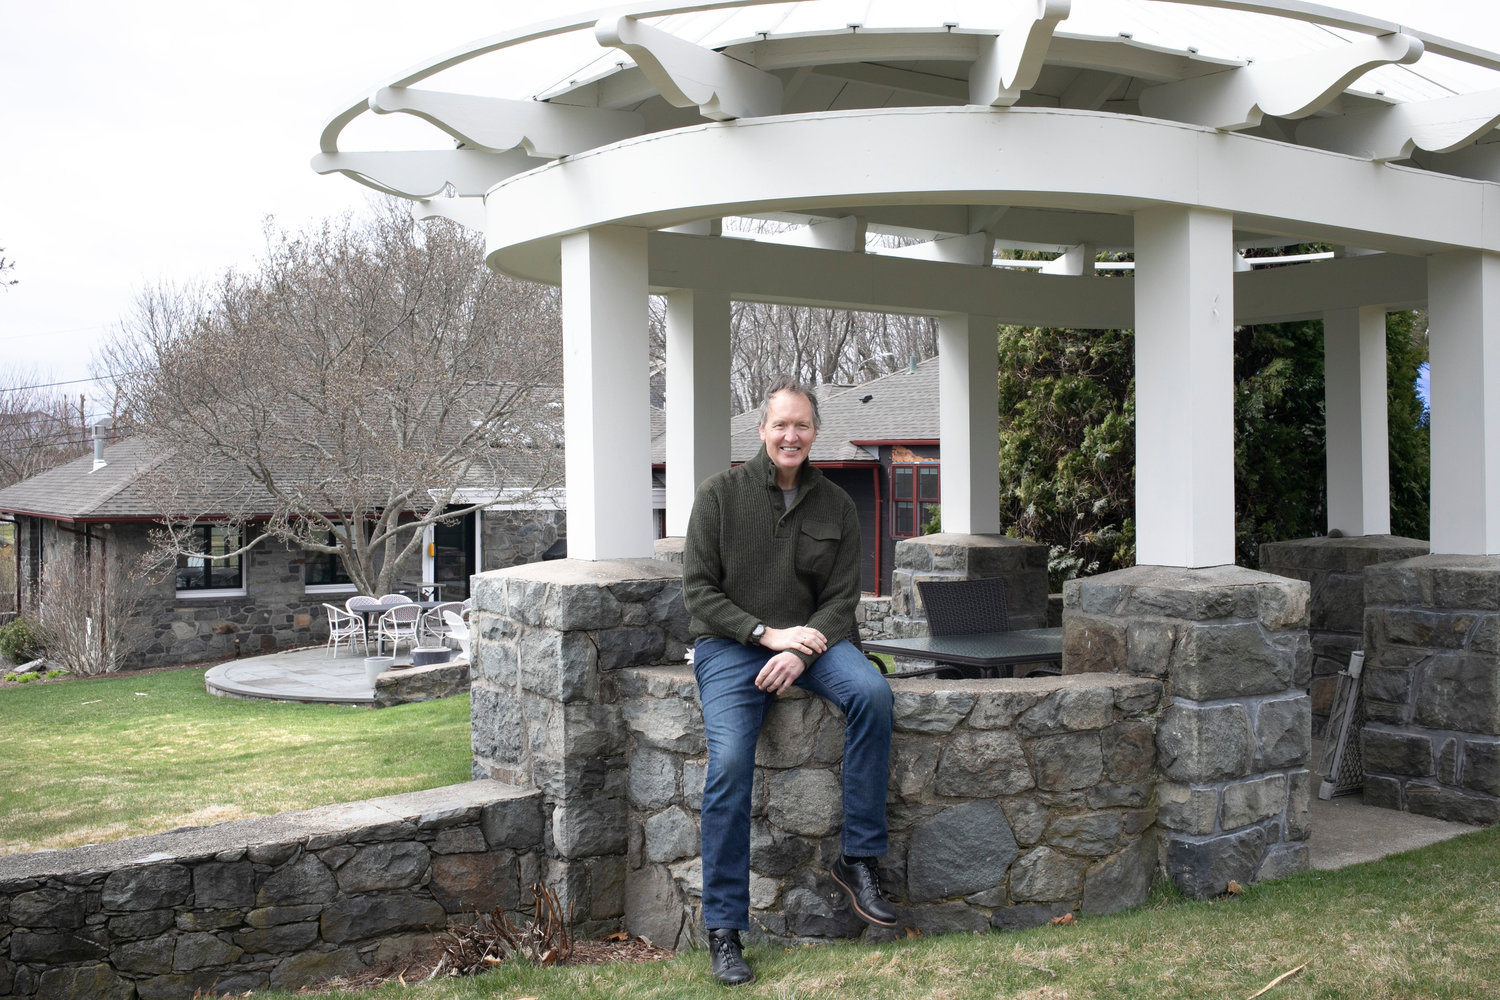 Chris Iseleib and his wife, Ann Marie, moved from the Washington, D.C. area to Barrington, buying a million-dollar house that they saw only on Zoom. Located off Nayatt Road and close to the water, it is more than 100 years old and comes with a unique stone gazebo.